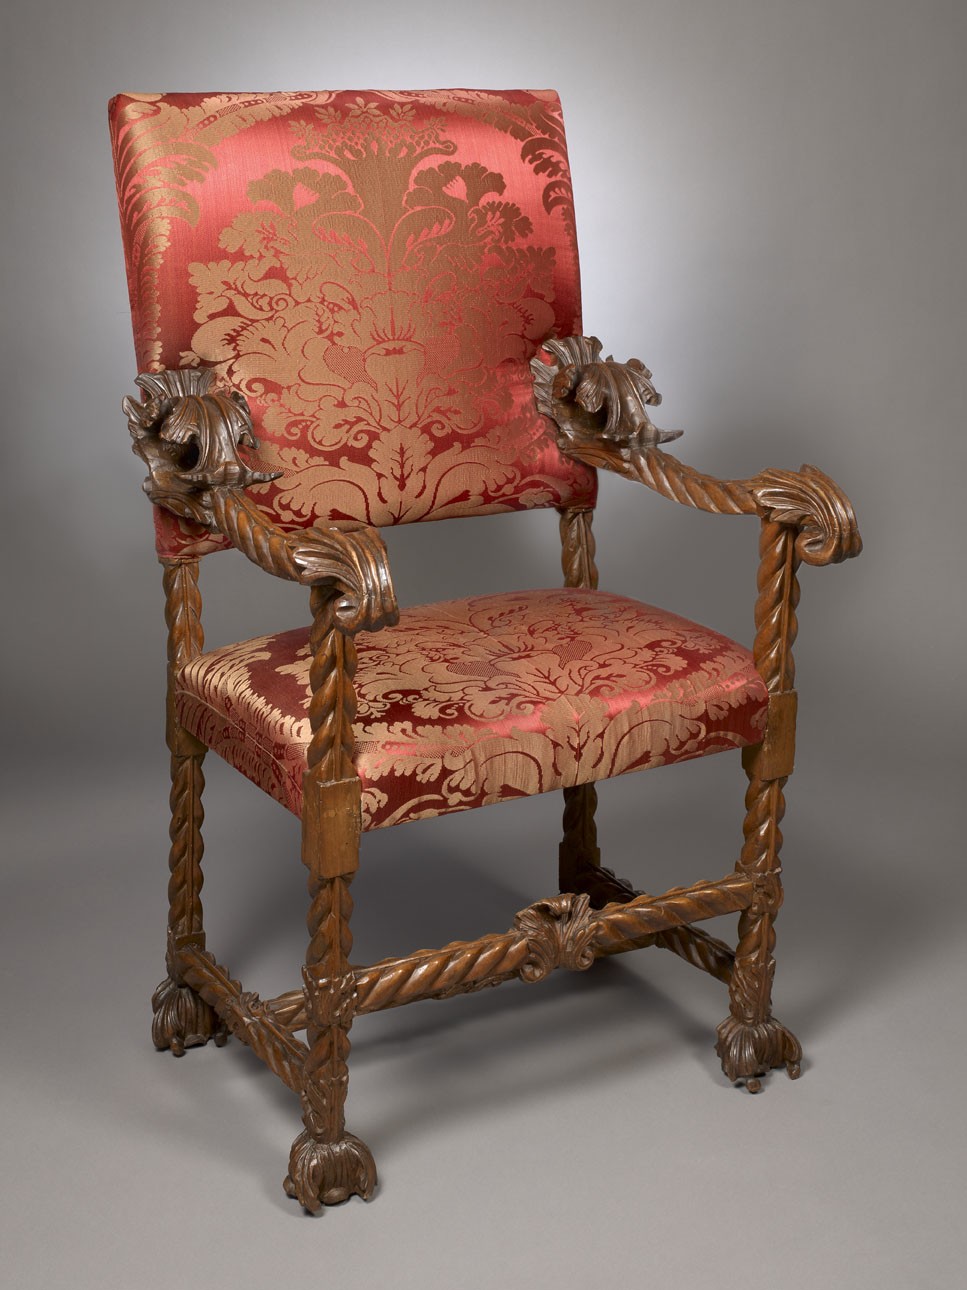 Two Pairs of Baroque Carved Armchairs, Italy, Venice, c. 1680